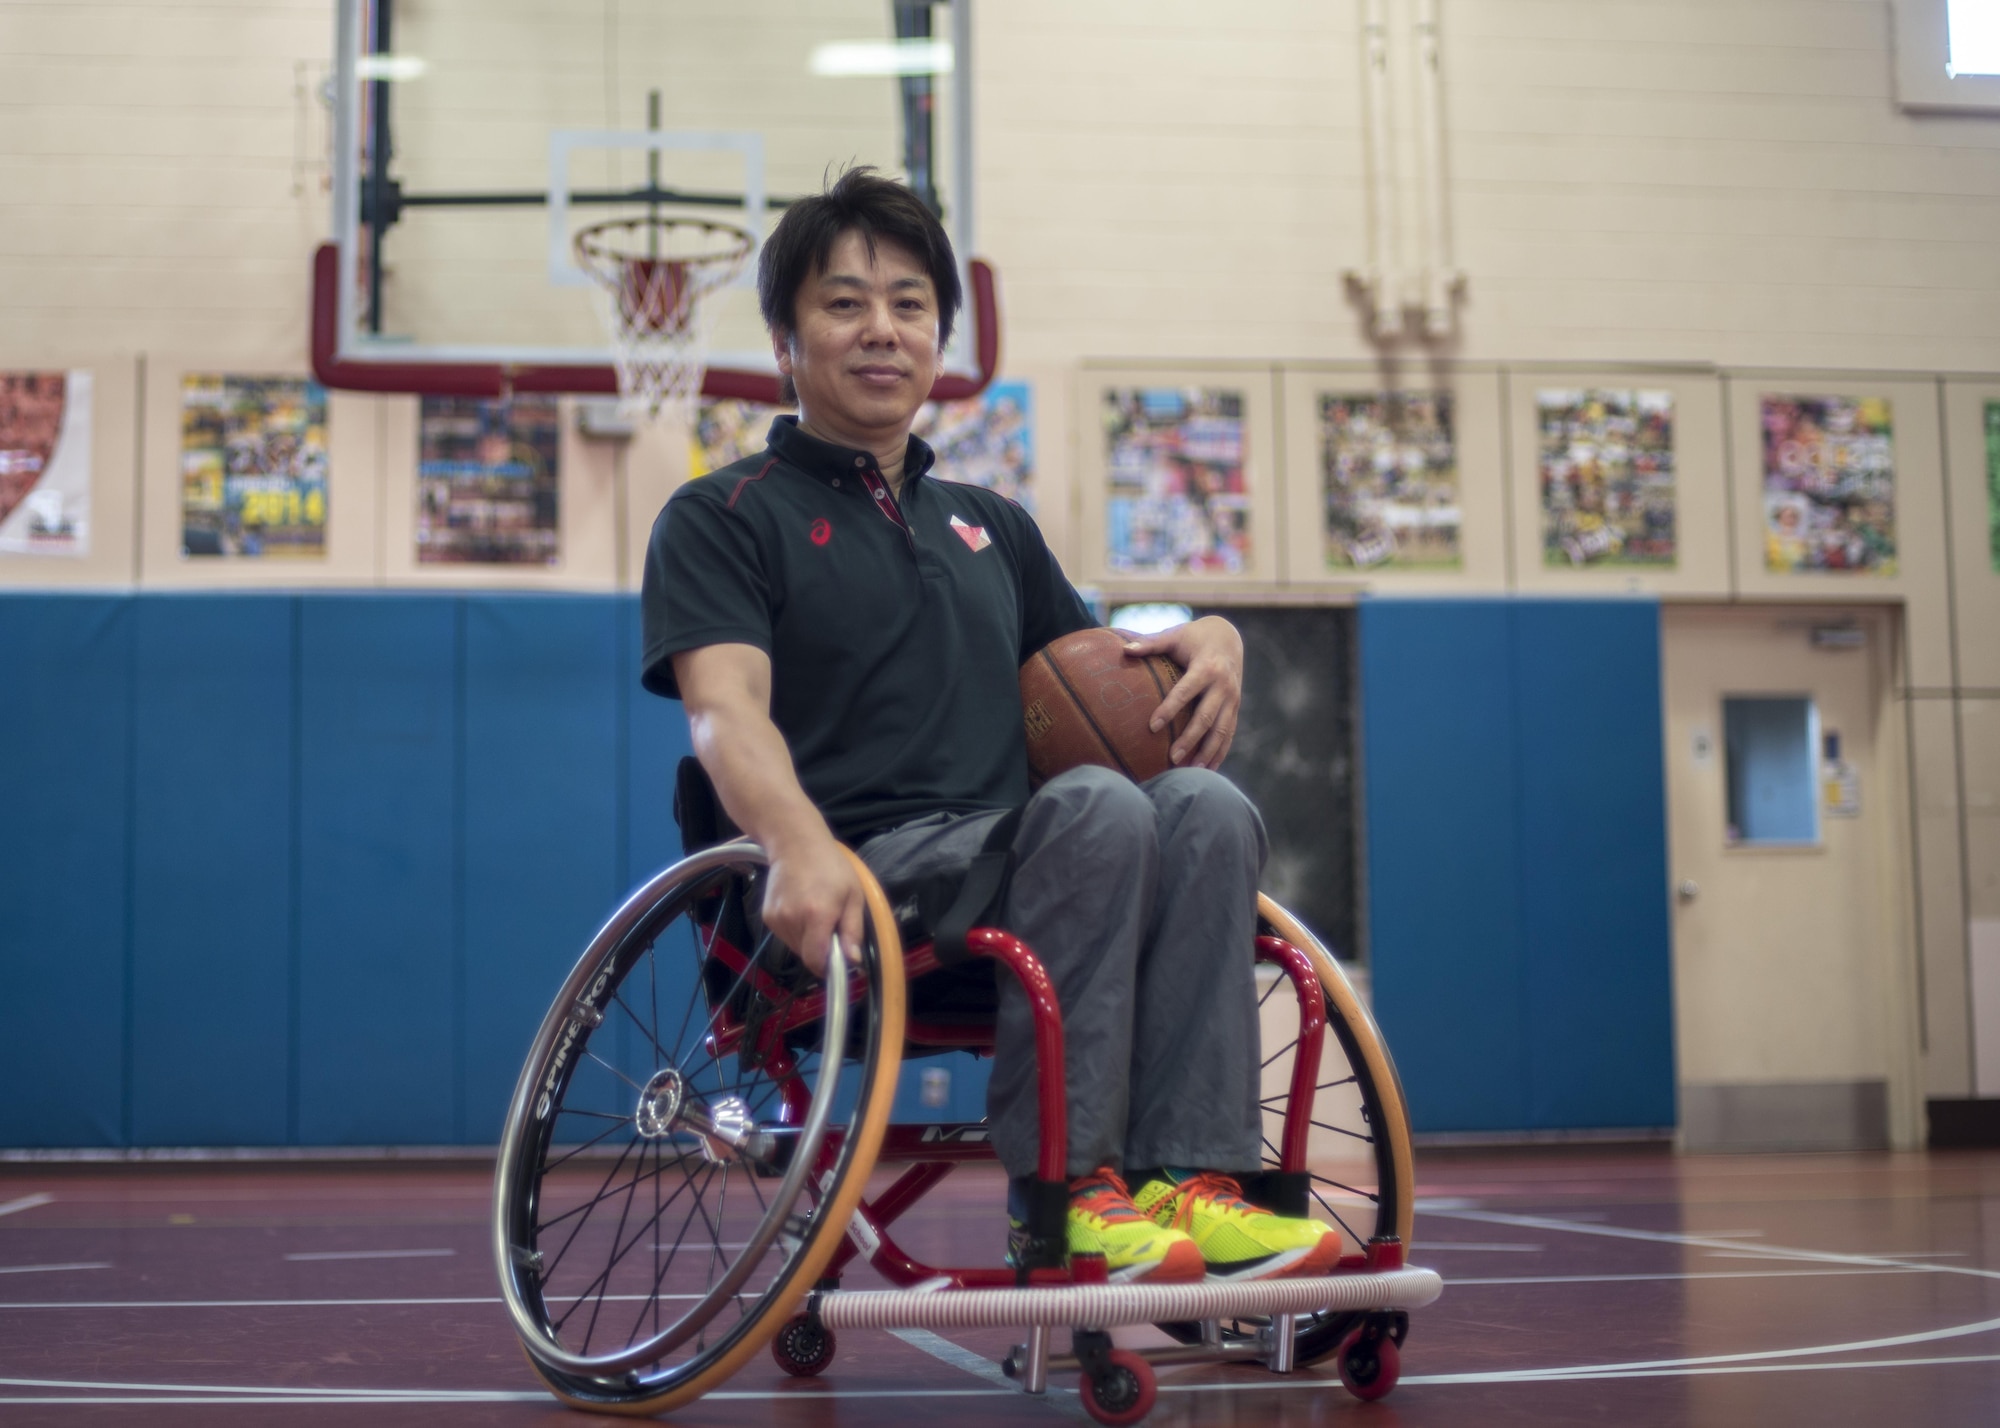 Shinji Negi, a project director with the Nippon Foundation Paralympic Support Center, poses for a photo at Misawa Air Base, Japan, June 28, 2016. Negi travels across the world in order to teach children about life with disabilities and persevering despite difficulties that may occur in life. He was paralyzed from the waist down in high school and went on to become the captain of the Japan Men's National Wheelchair Basketball Team at the 2000 Sydney Paralympic Games. (U.S. Air Force photo by Senior Airman Brittany A. Chase)